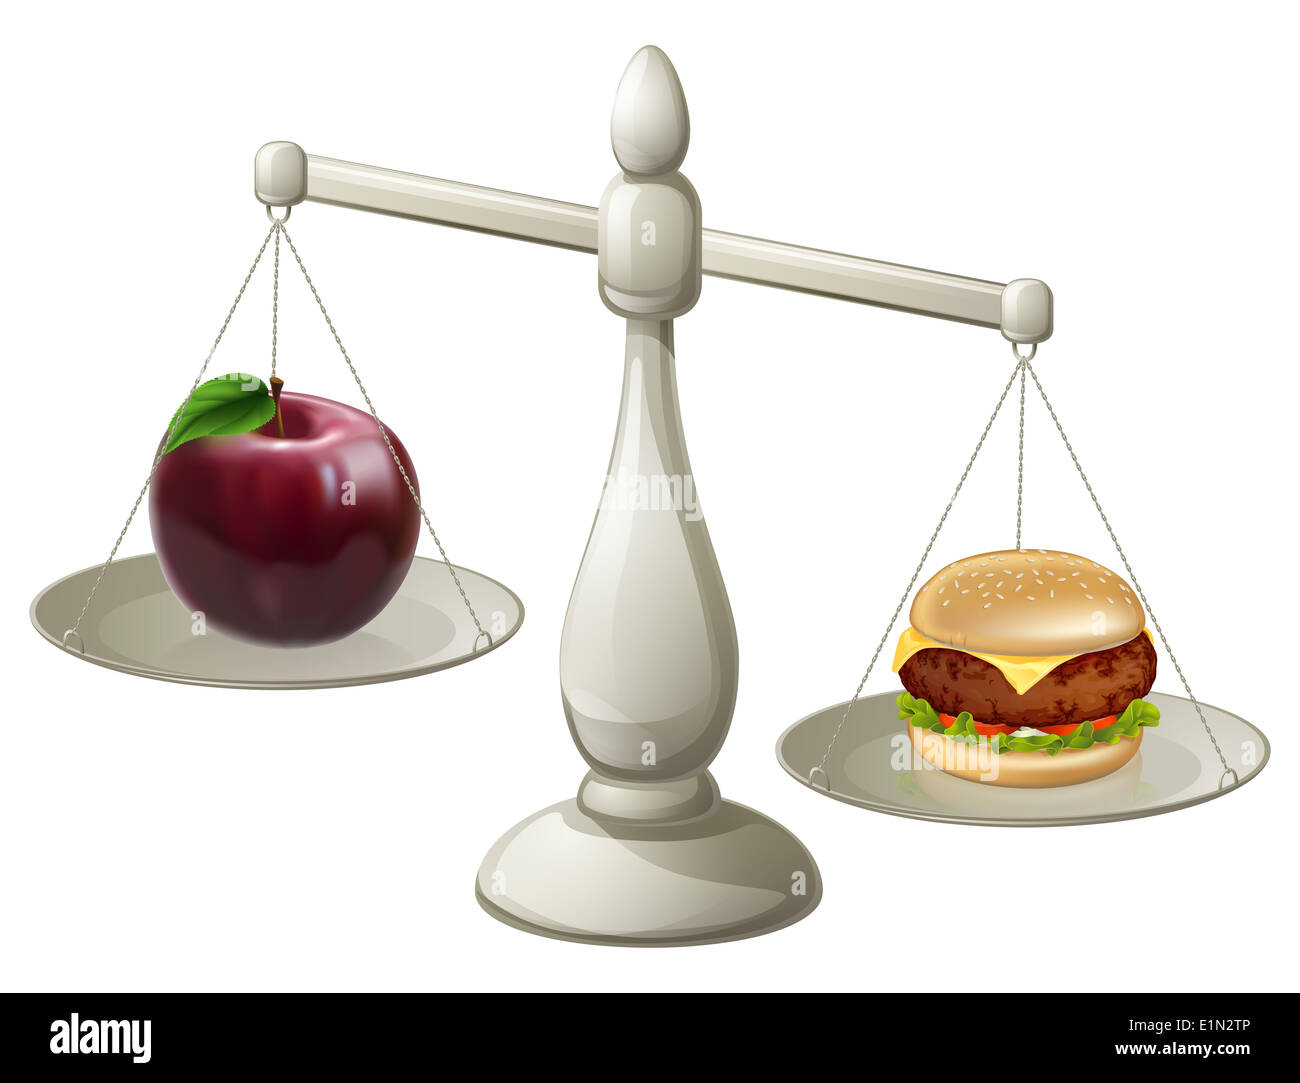 https://c8.alamy.com/comp/E1N2TP/apple-and-burger-on-scales-healthy-eating-willpower-concept-stocking-E1N2TP.jpg